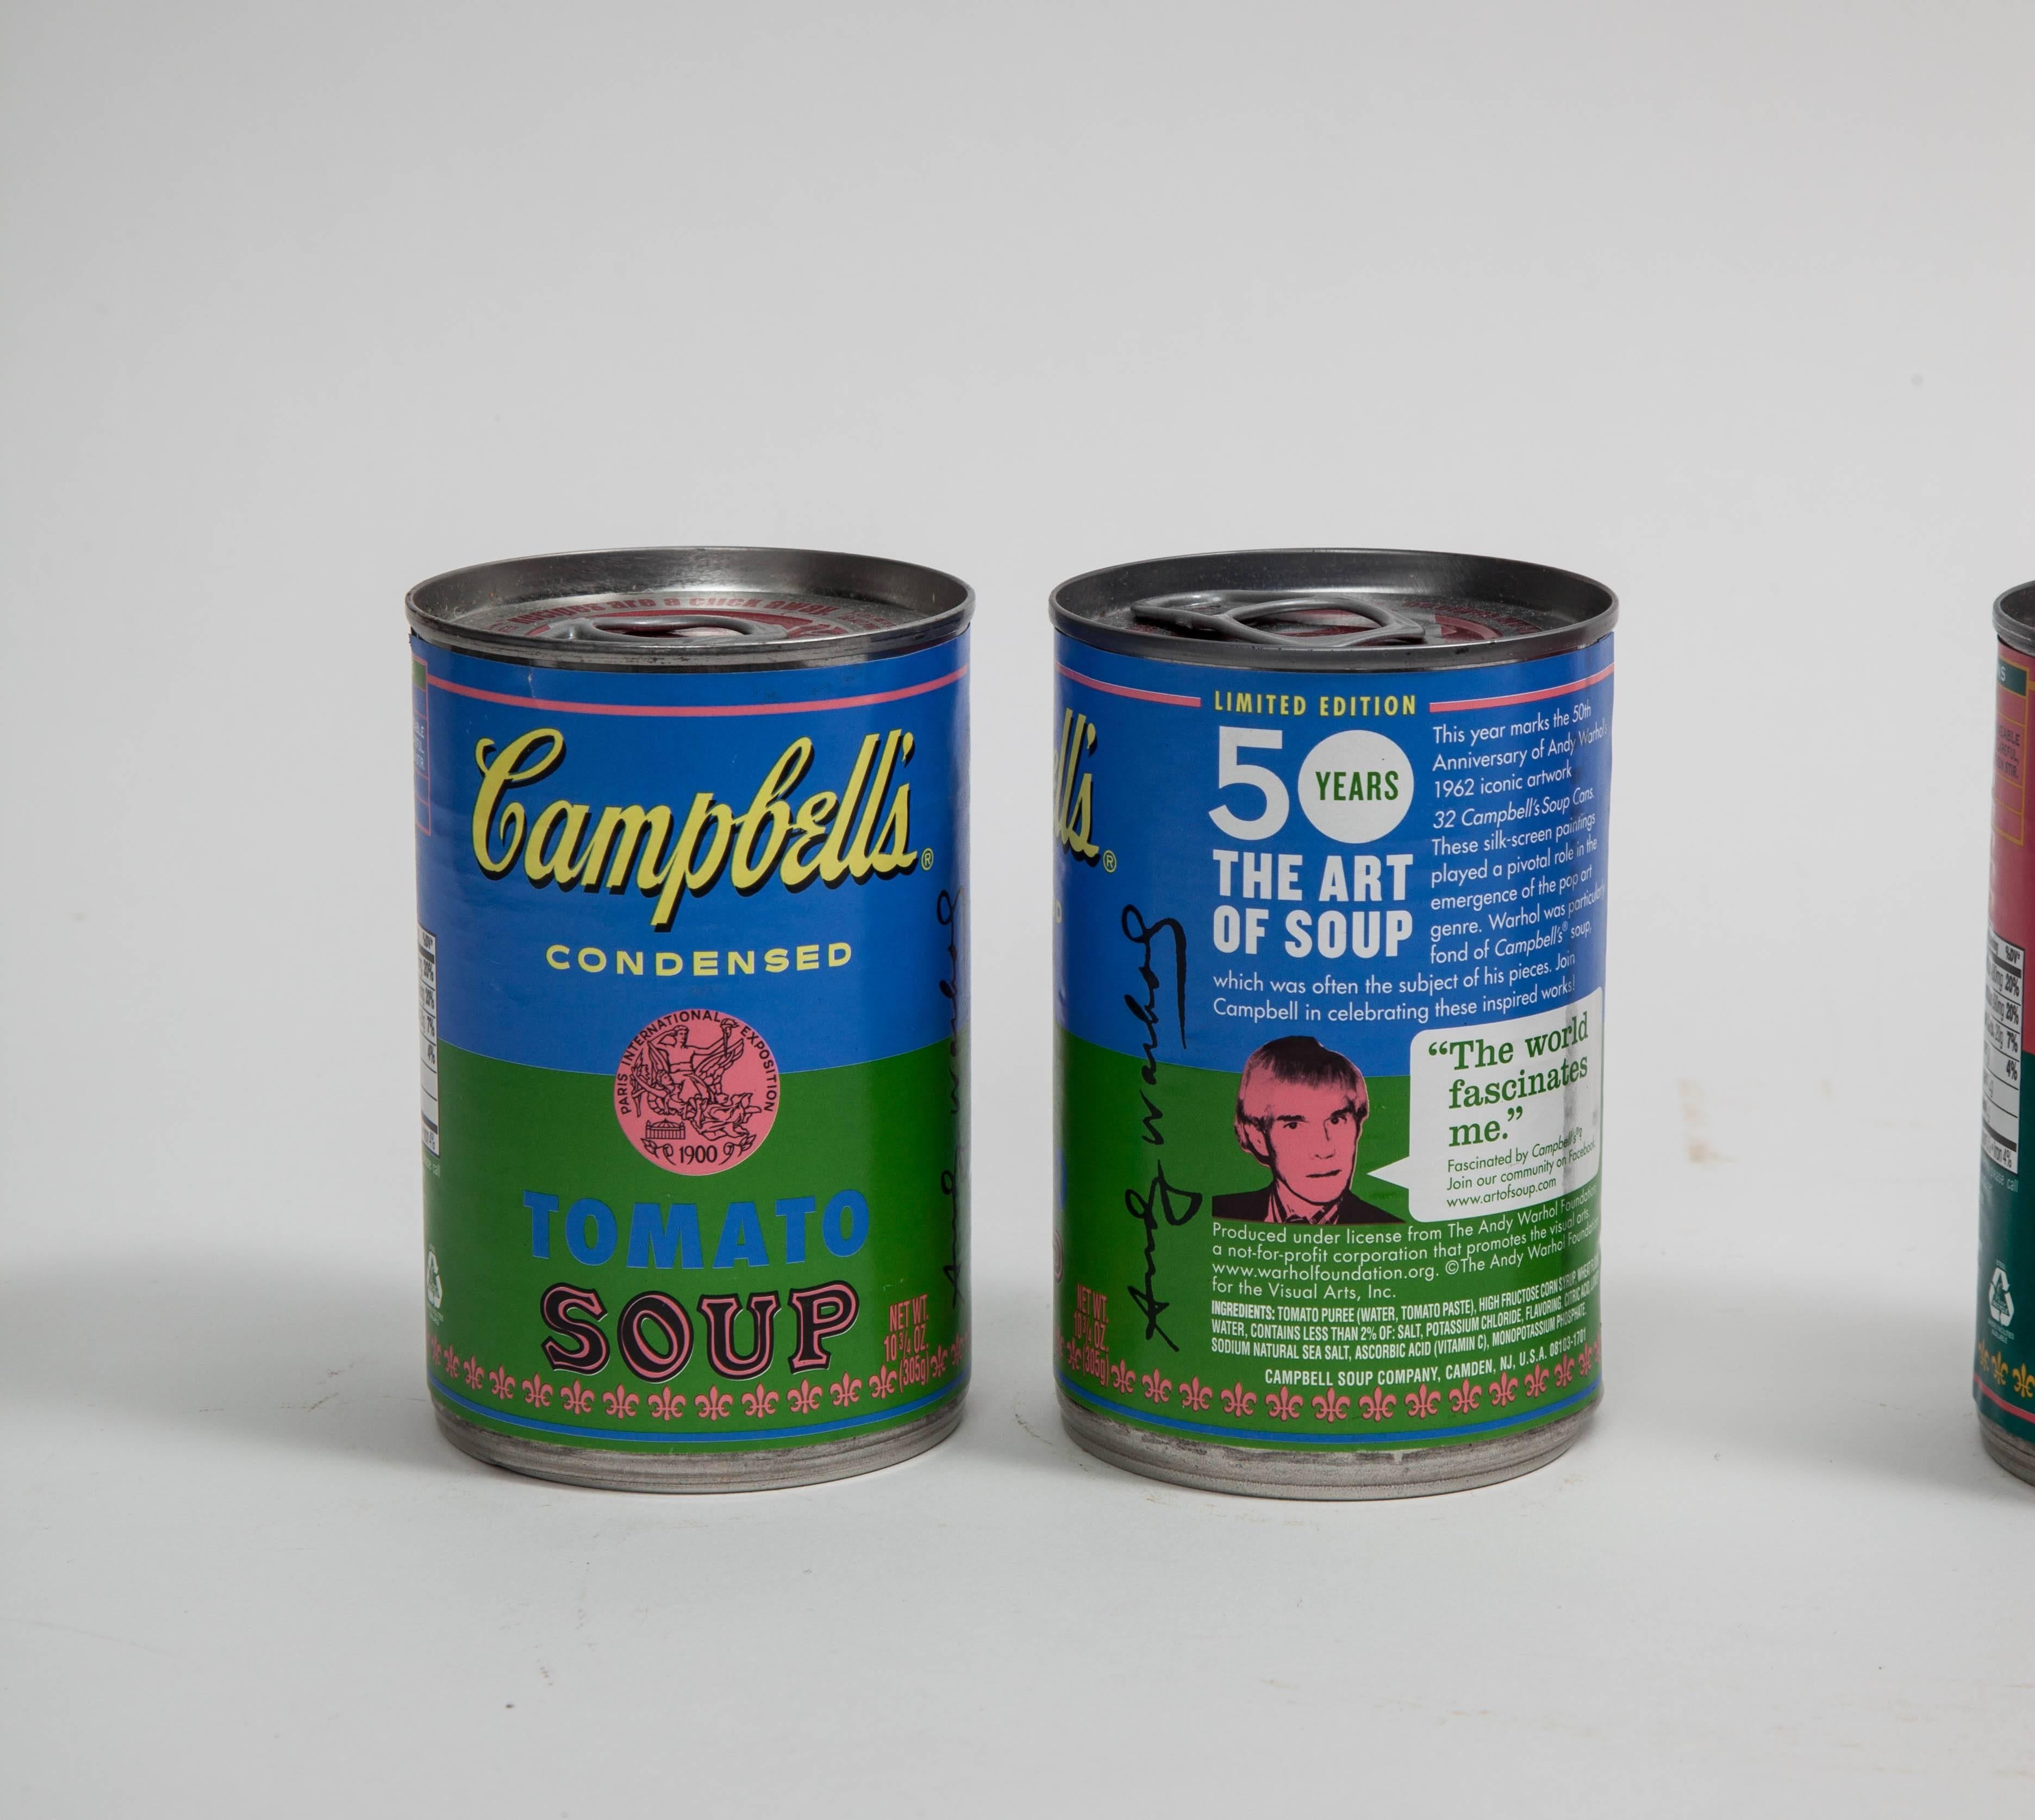 American Andy Warhol Campbell's Soup Cans 50th Anniversary Limited Edition, USA 2012